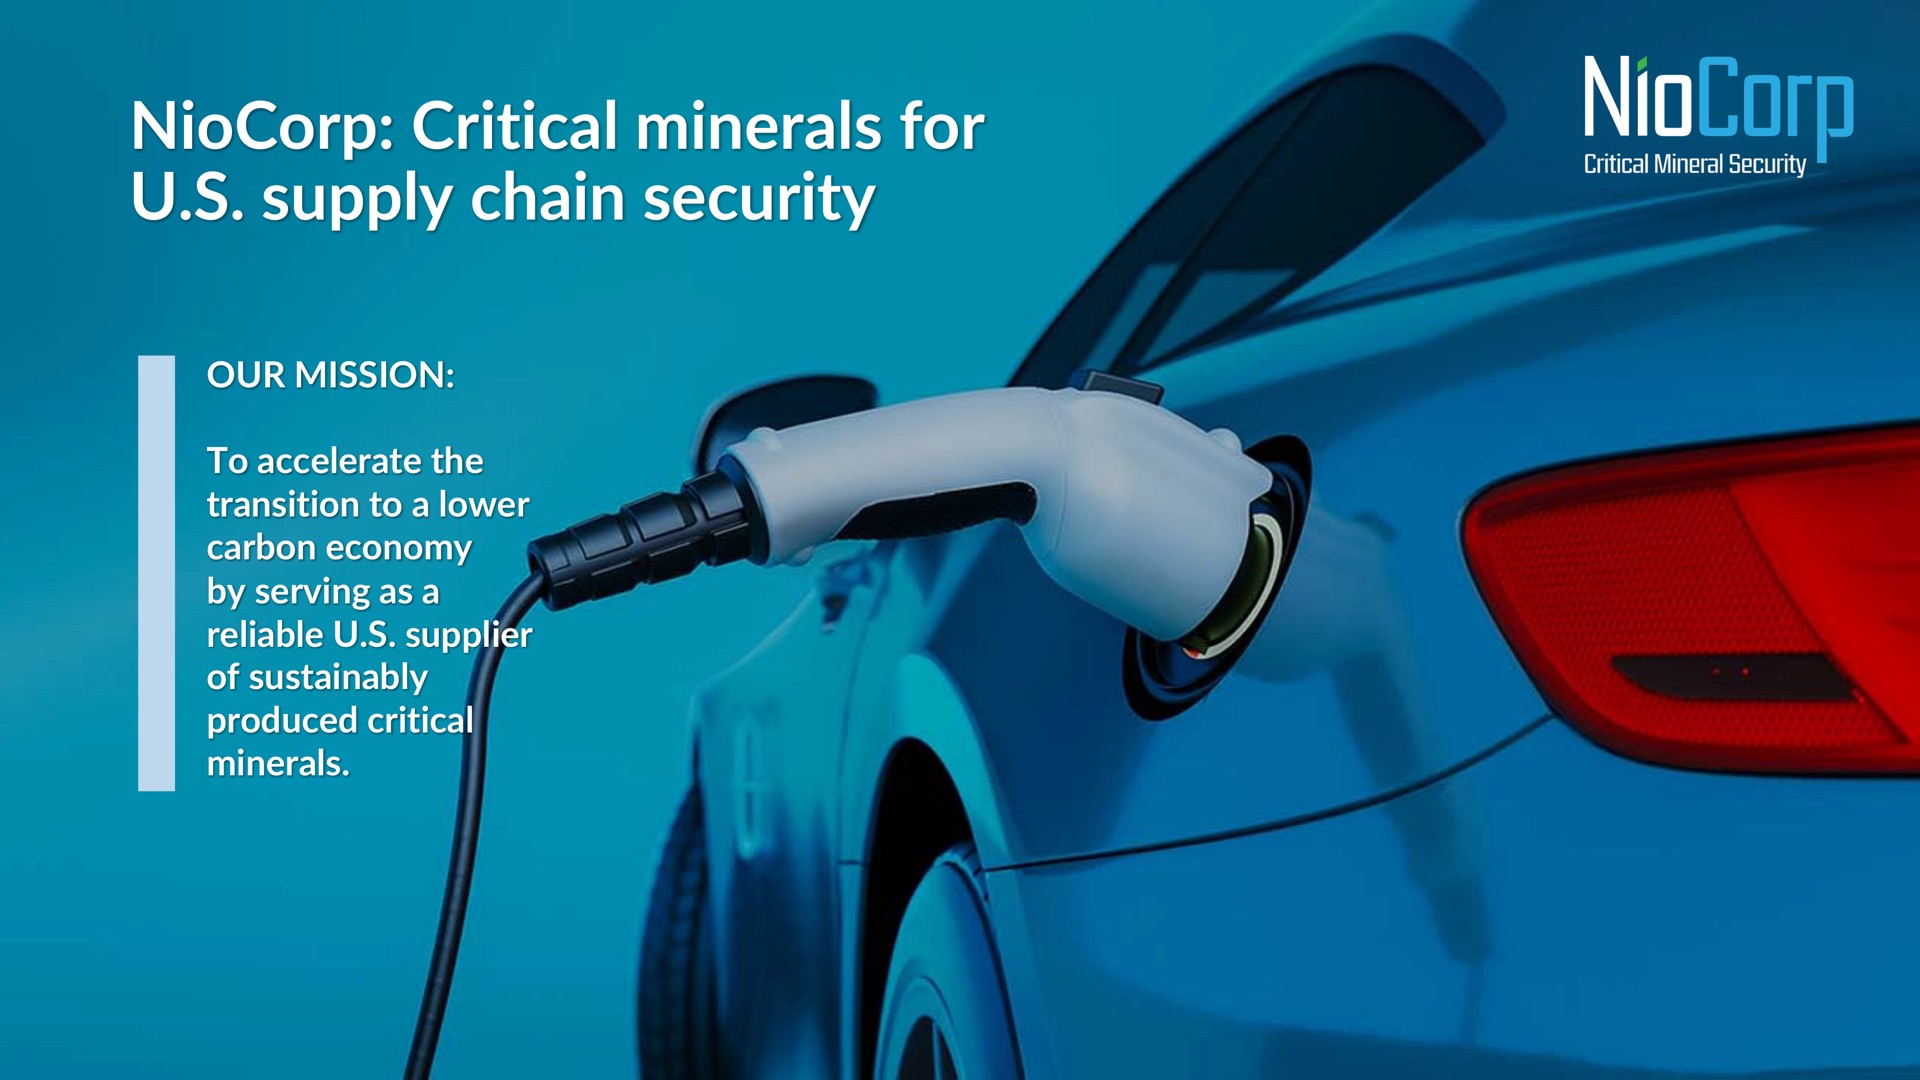 critical minerals for supply chain security our mission to accelerate the transition to a lower carbon economy by serving as a reliable supplier of produced critical minerals | NioCorp